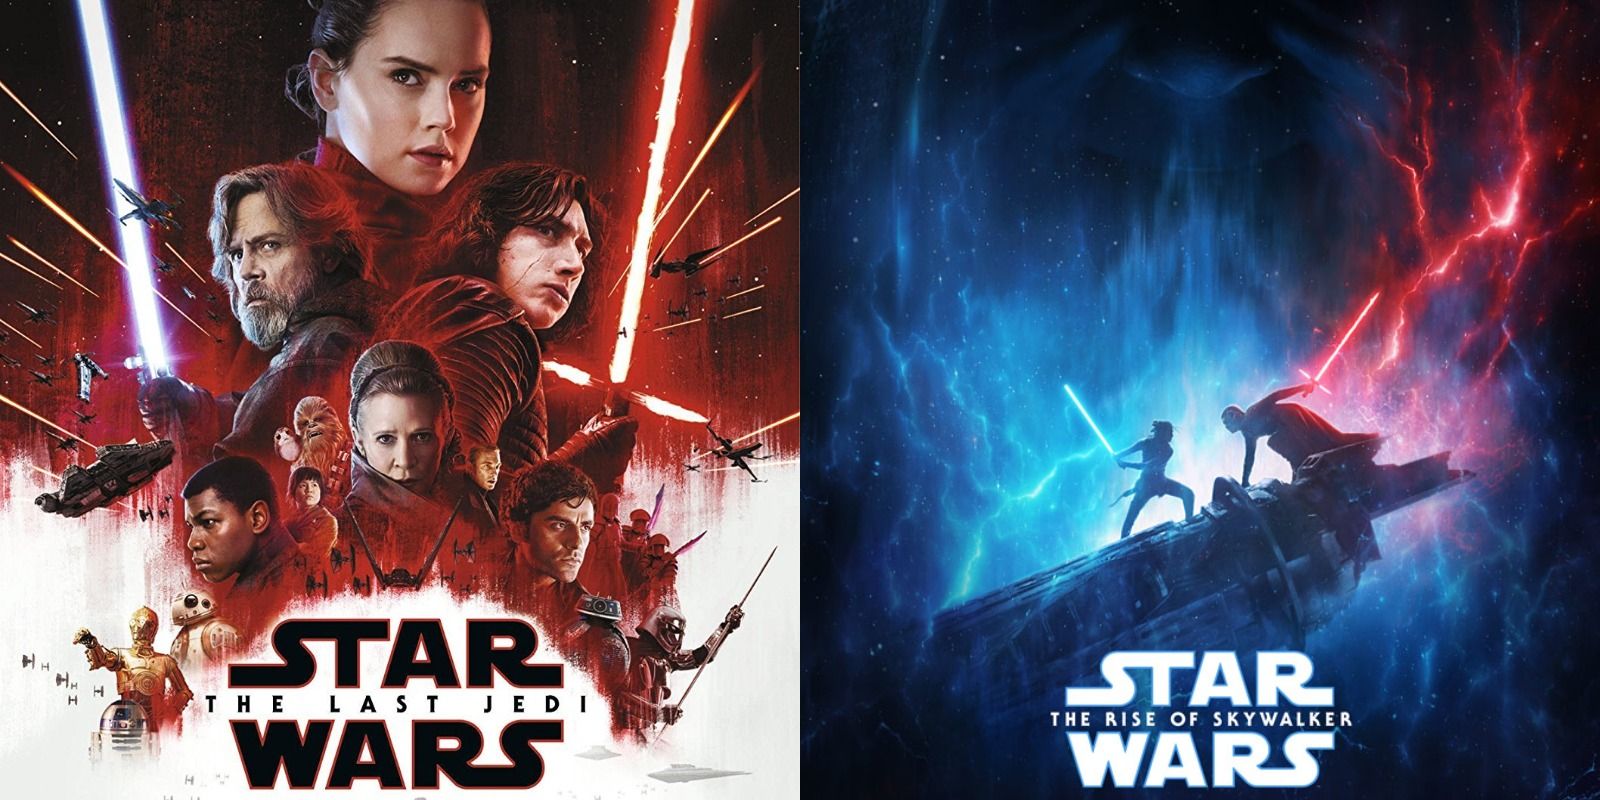 Posters for The Last Jedi and The Rise of Skywalker